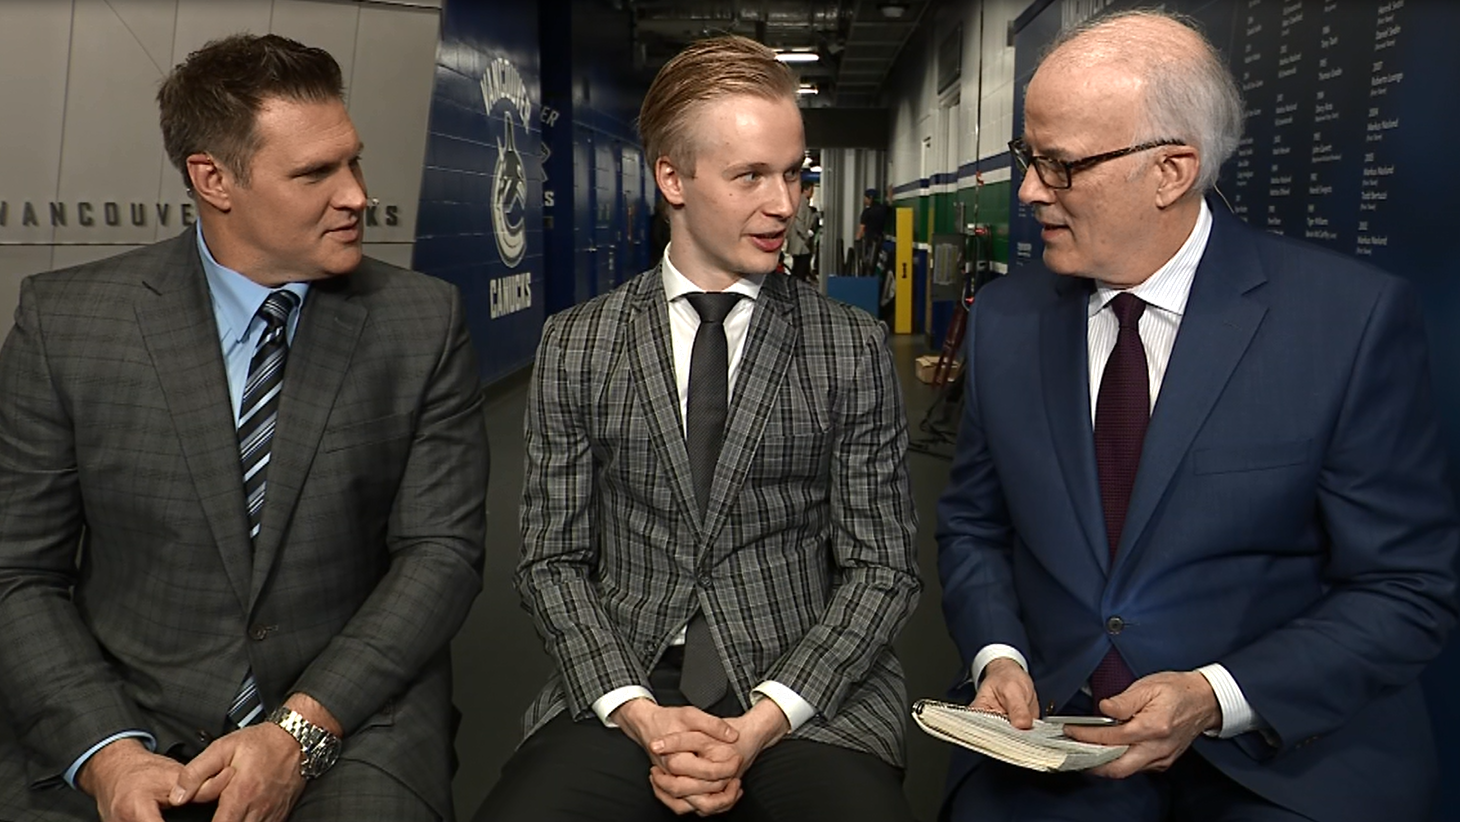 Surfin' With The Alien. Elias Pettersson On After 